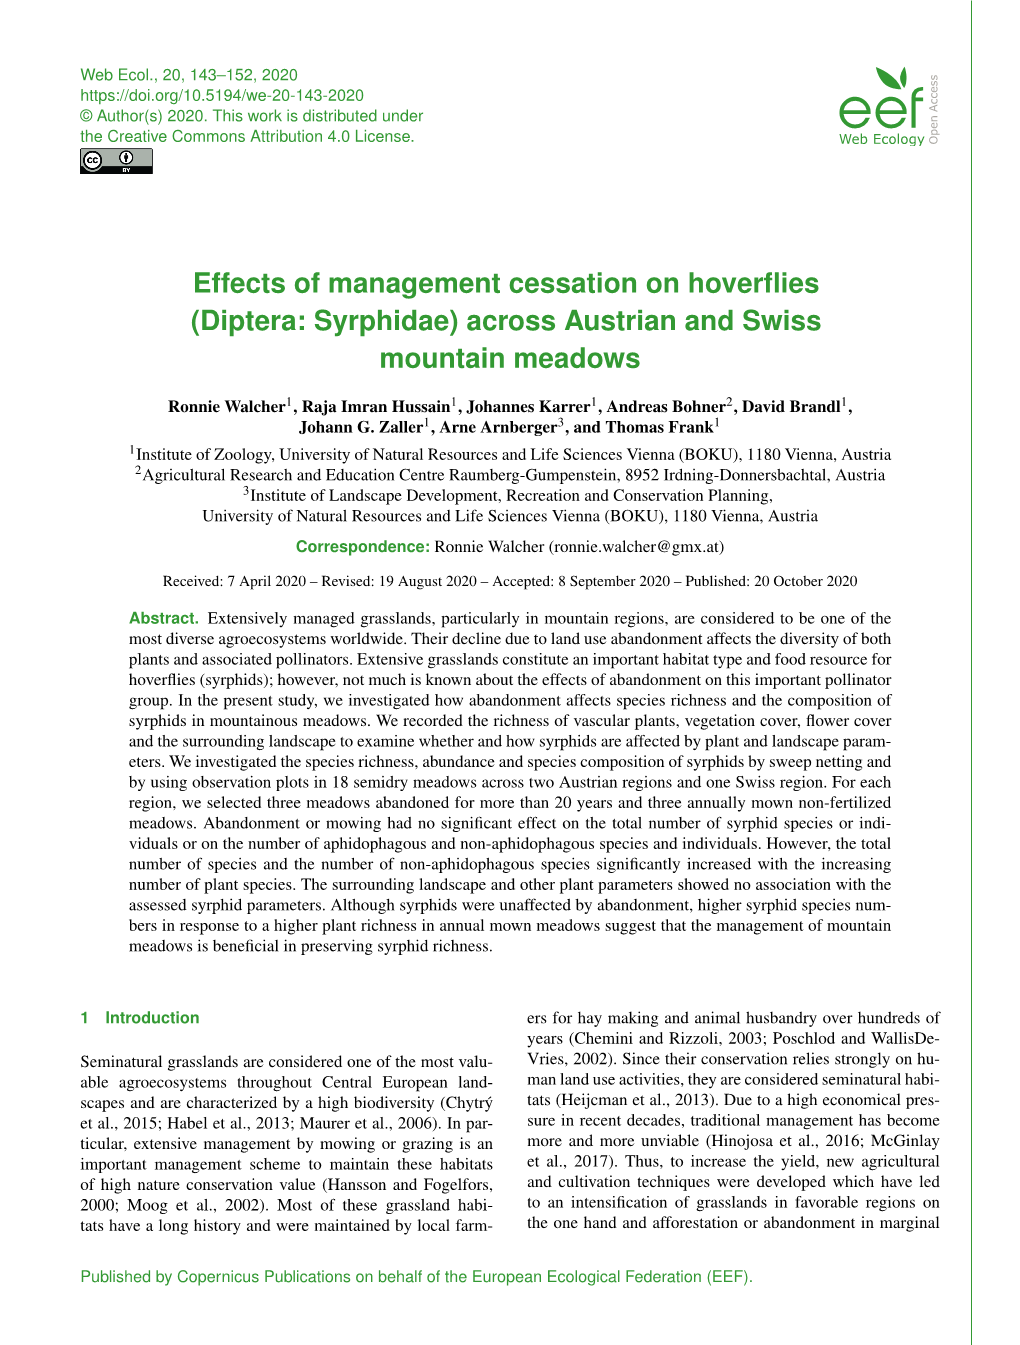 Effects of Management Cessation on Hoverflies (Diptera: Syrphidae)